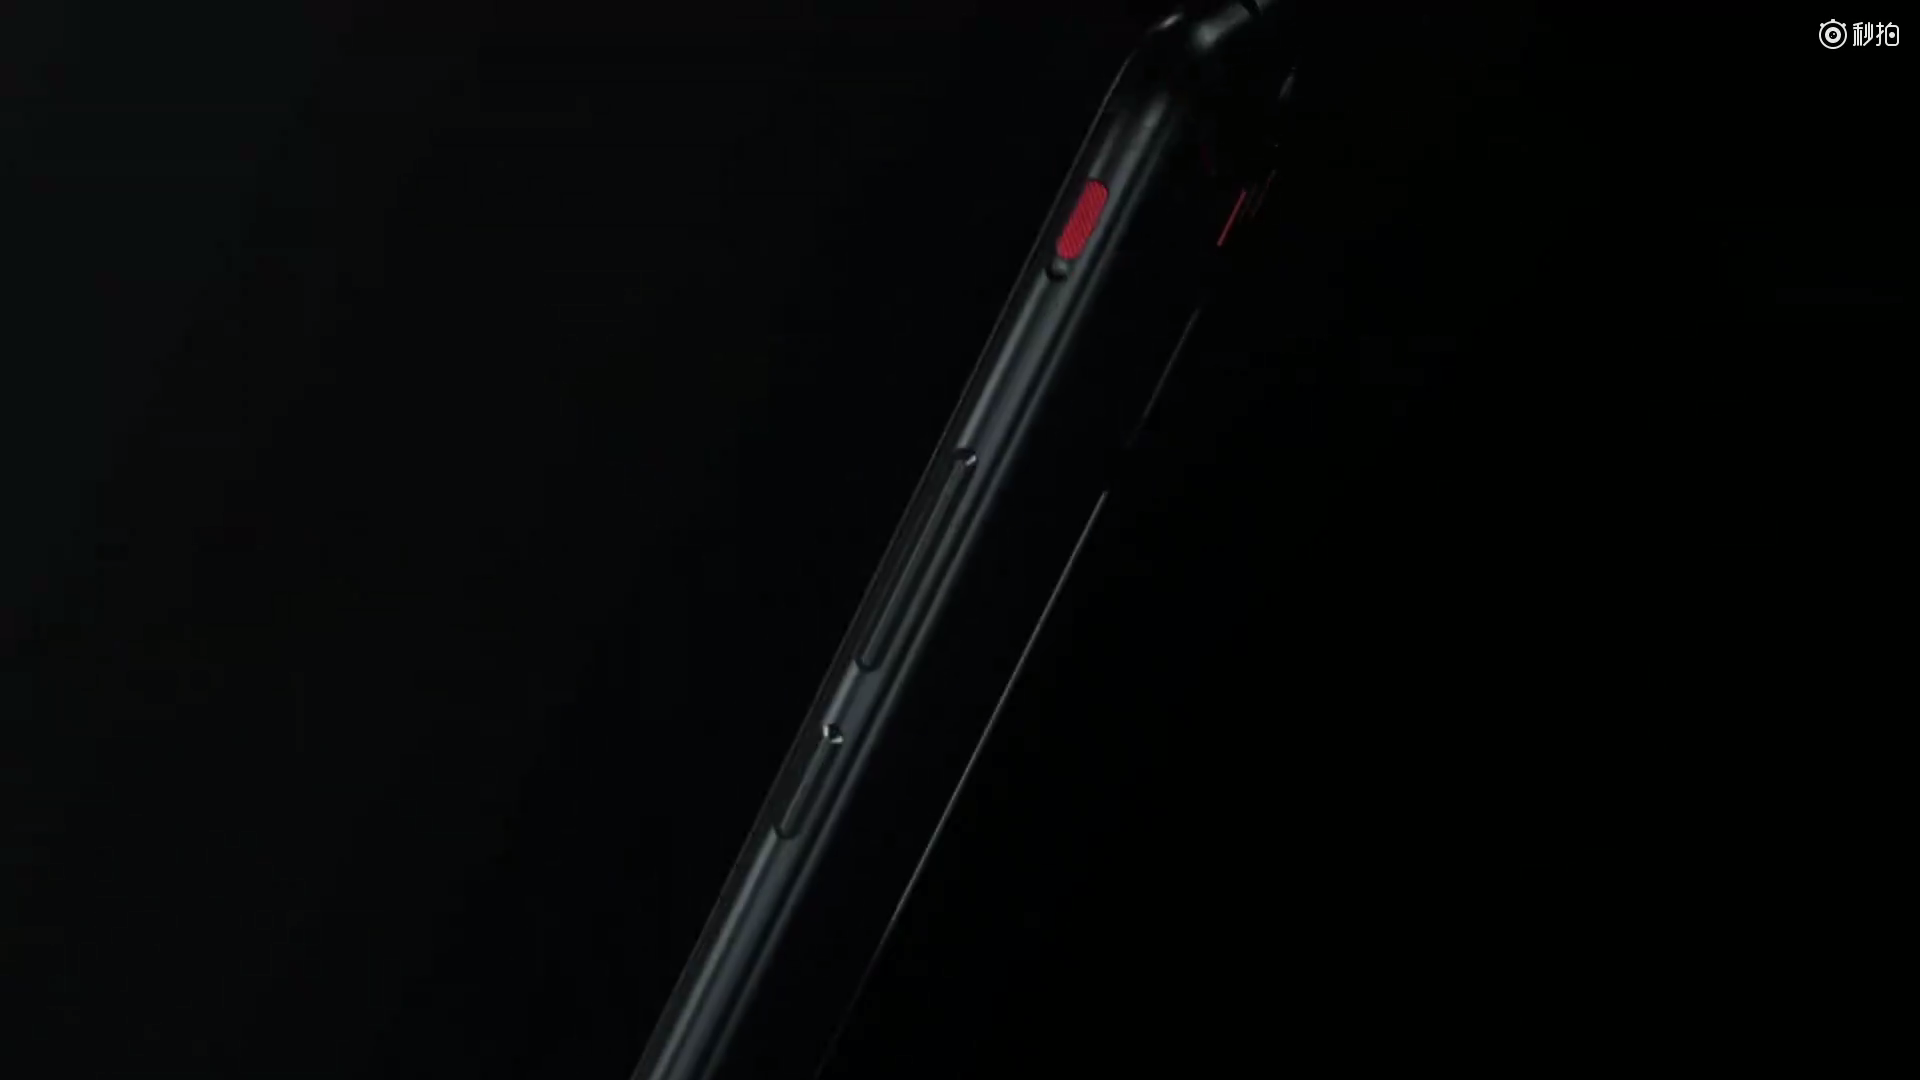 Teaser hints Nubia Red Magic gaming smartphone launch on April 19 2